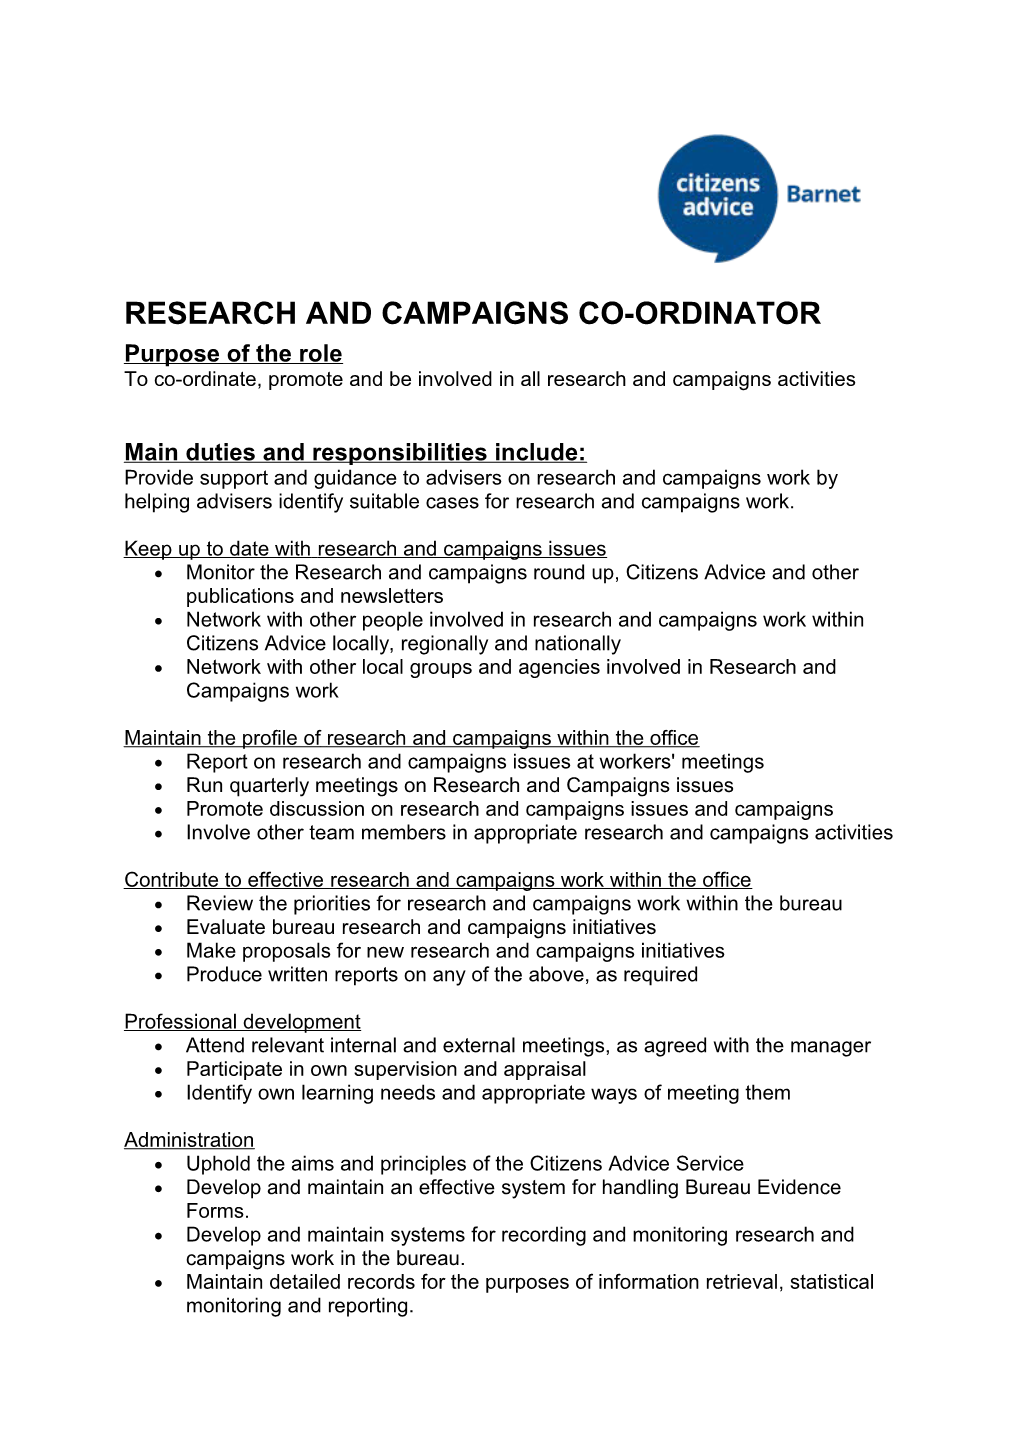 Research and Campaigns Co-Ordinator